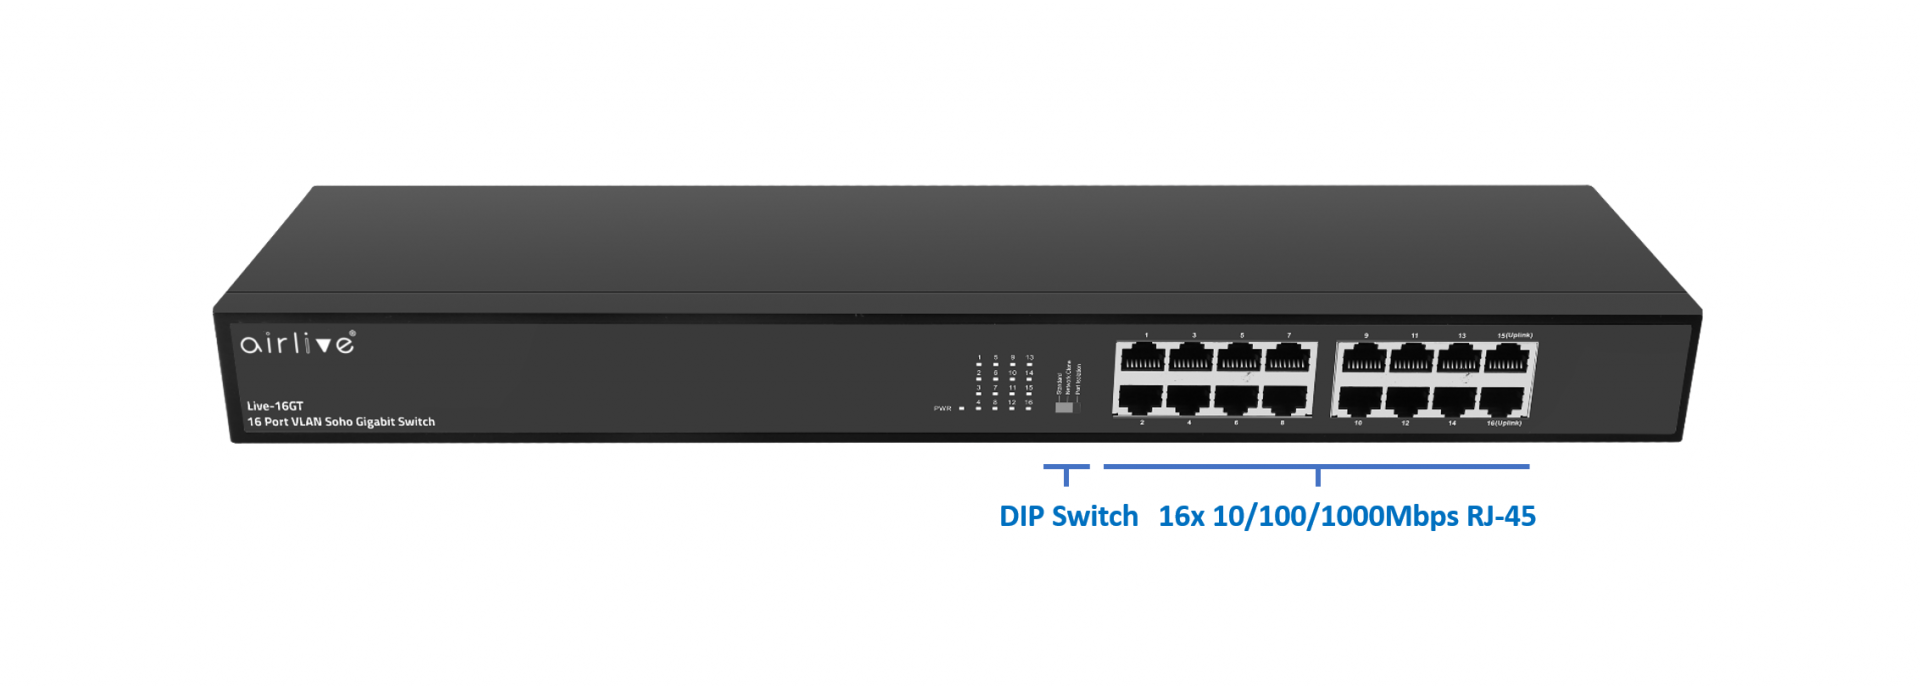 More than just a Plug-and-Play 16-Port Gigabit Switch VLAN and Flow Control supported